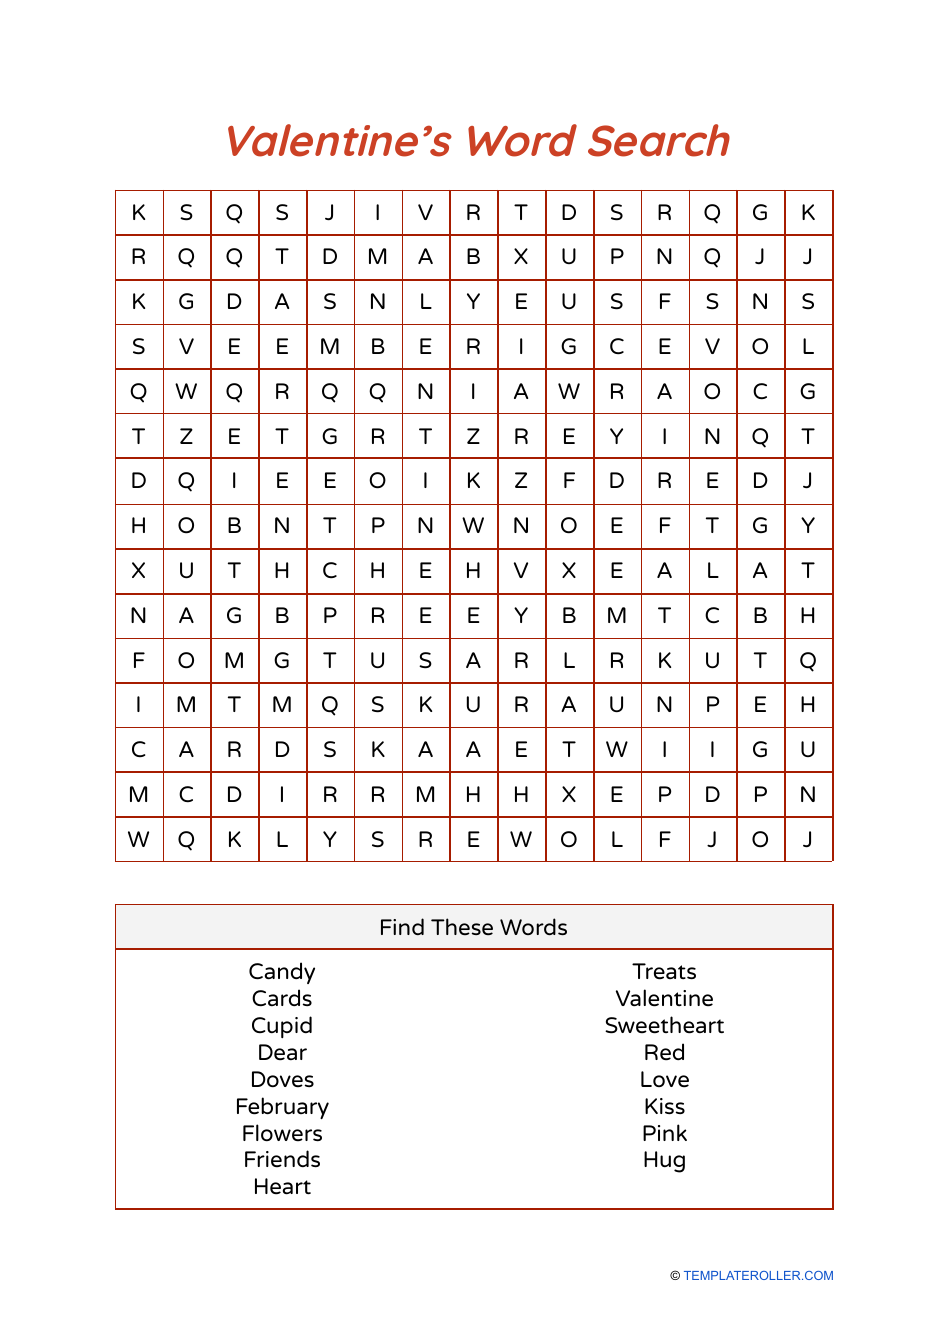 Preview of Valentine's Day Word Search document, colored in orange